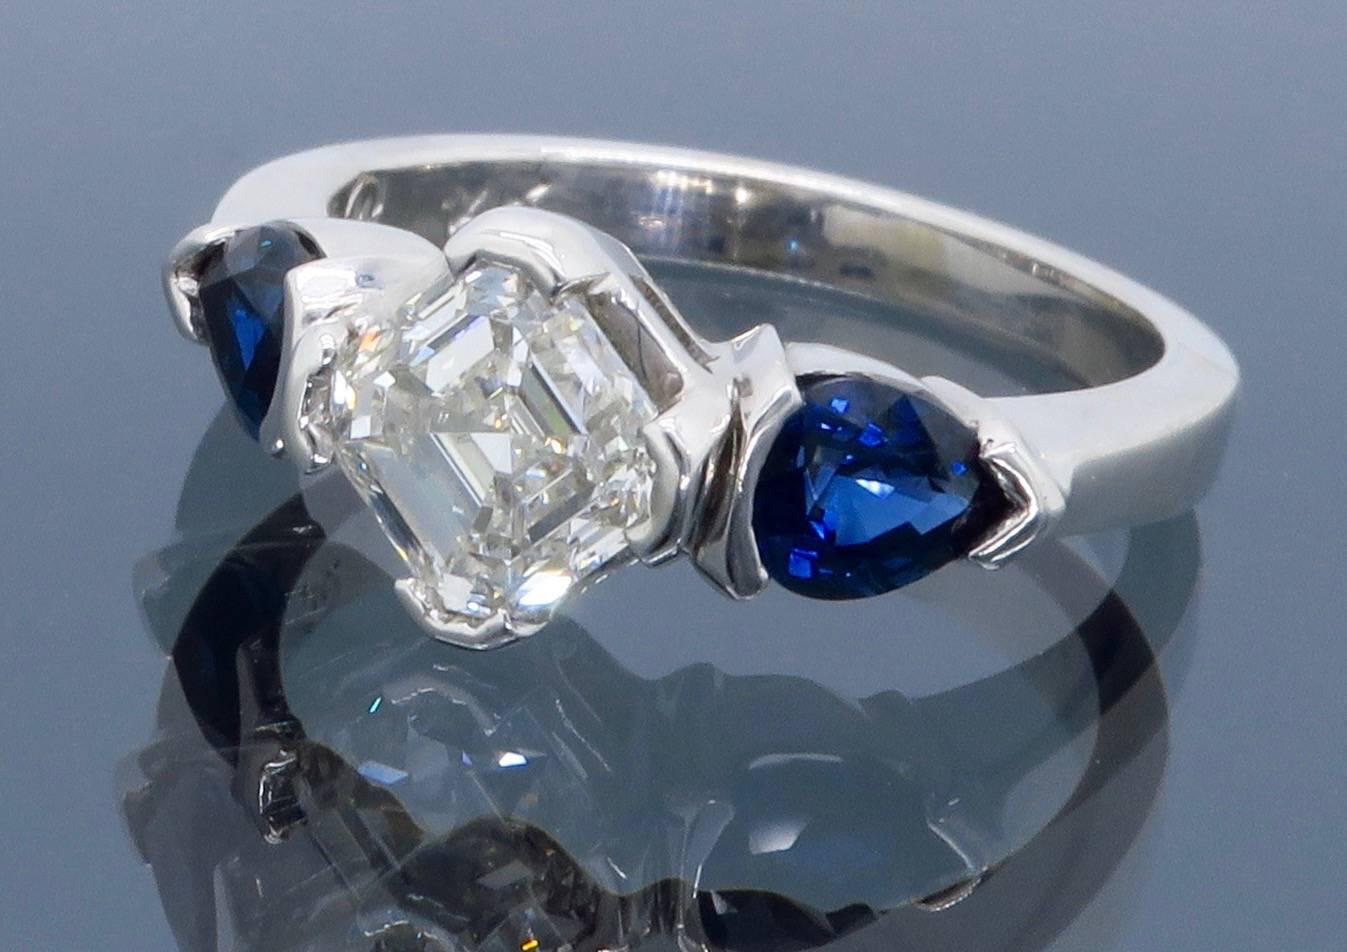 This beautiful ring features a .90CT Asscher Cut (Square Emerald cut) Diamond with G-H color, SI1 clarity. It is accented by two 4.9MM X 3.8MM pear cut blue sapphires. The 14K white gold ring is size 5.25 and weighs 4.1 grams.